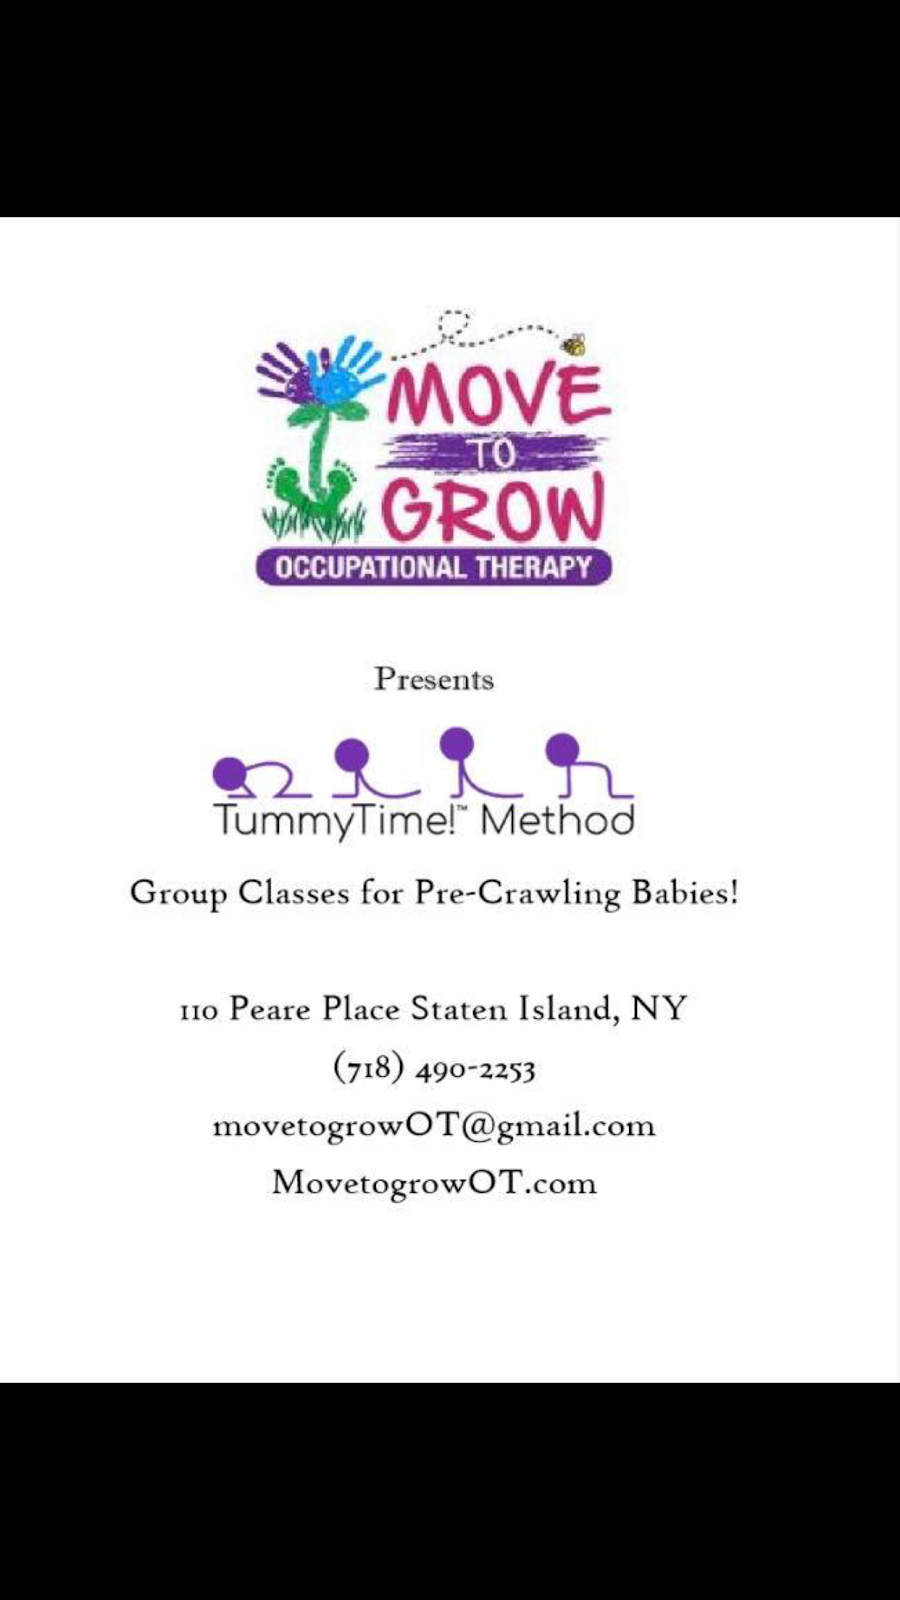 Move to Grow LLC | 110 Peare Pl, Staten Island, NY 10312 | Phone: (718) 490-2253